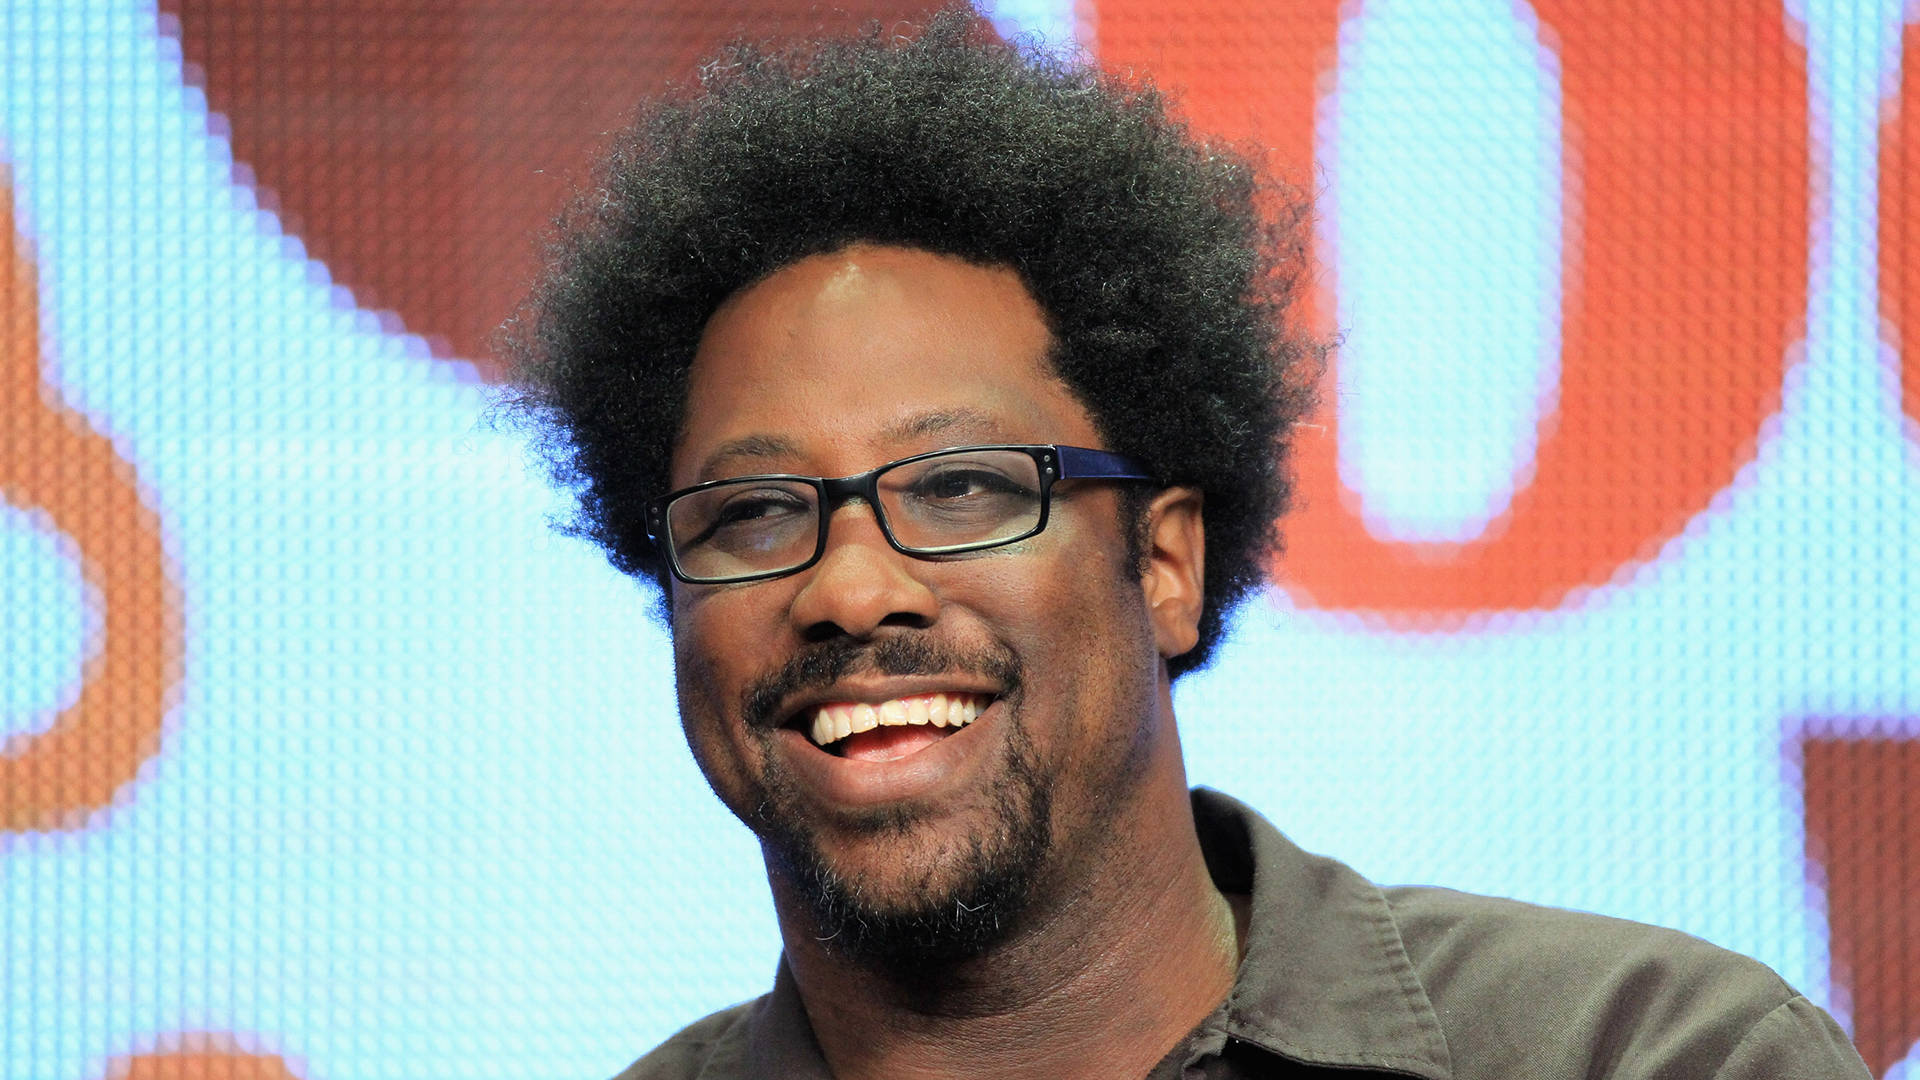 W. Kamau Bell speaks onstage at the 'Totally Biased with W. Kamau Bell' panel during the FX portion of the 2012 Summer TCA Tour on July 28, 2012 in Beverly Hills, California.   Frederick M. Brown/Getty Images